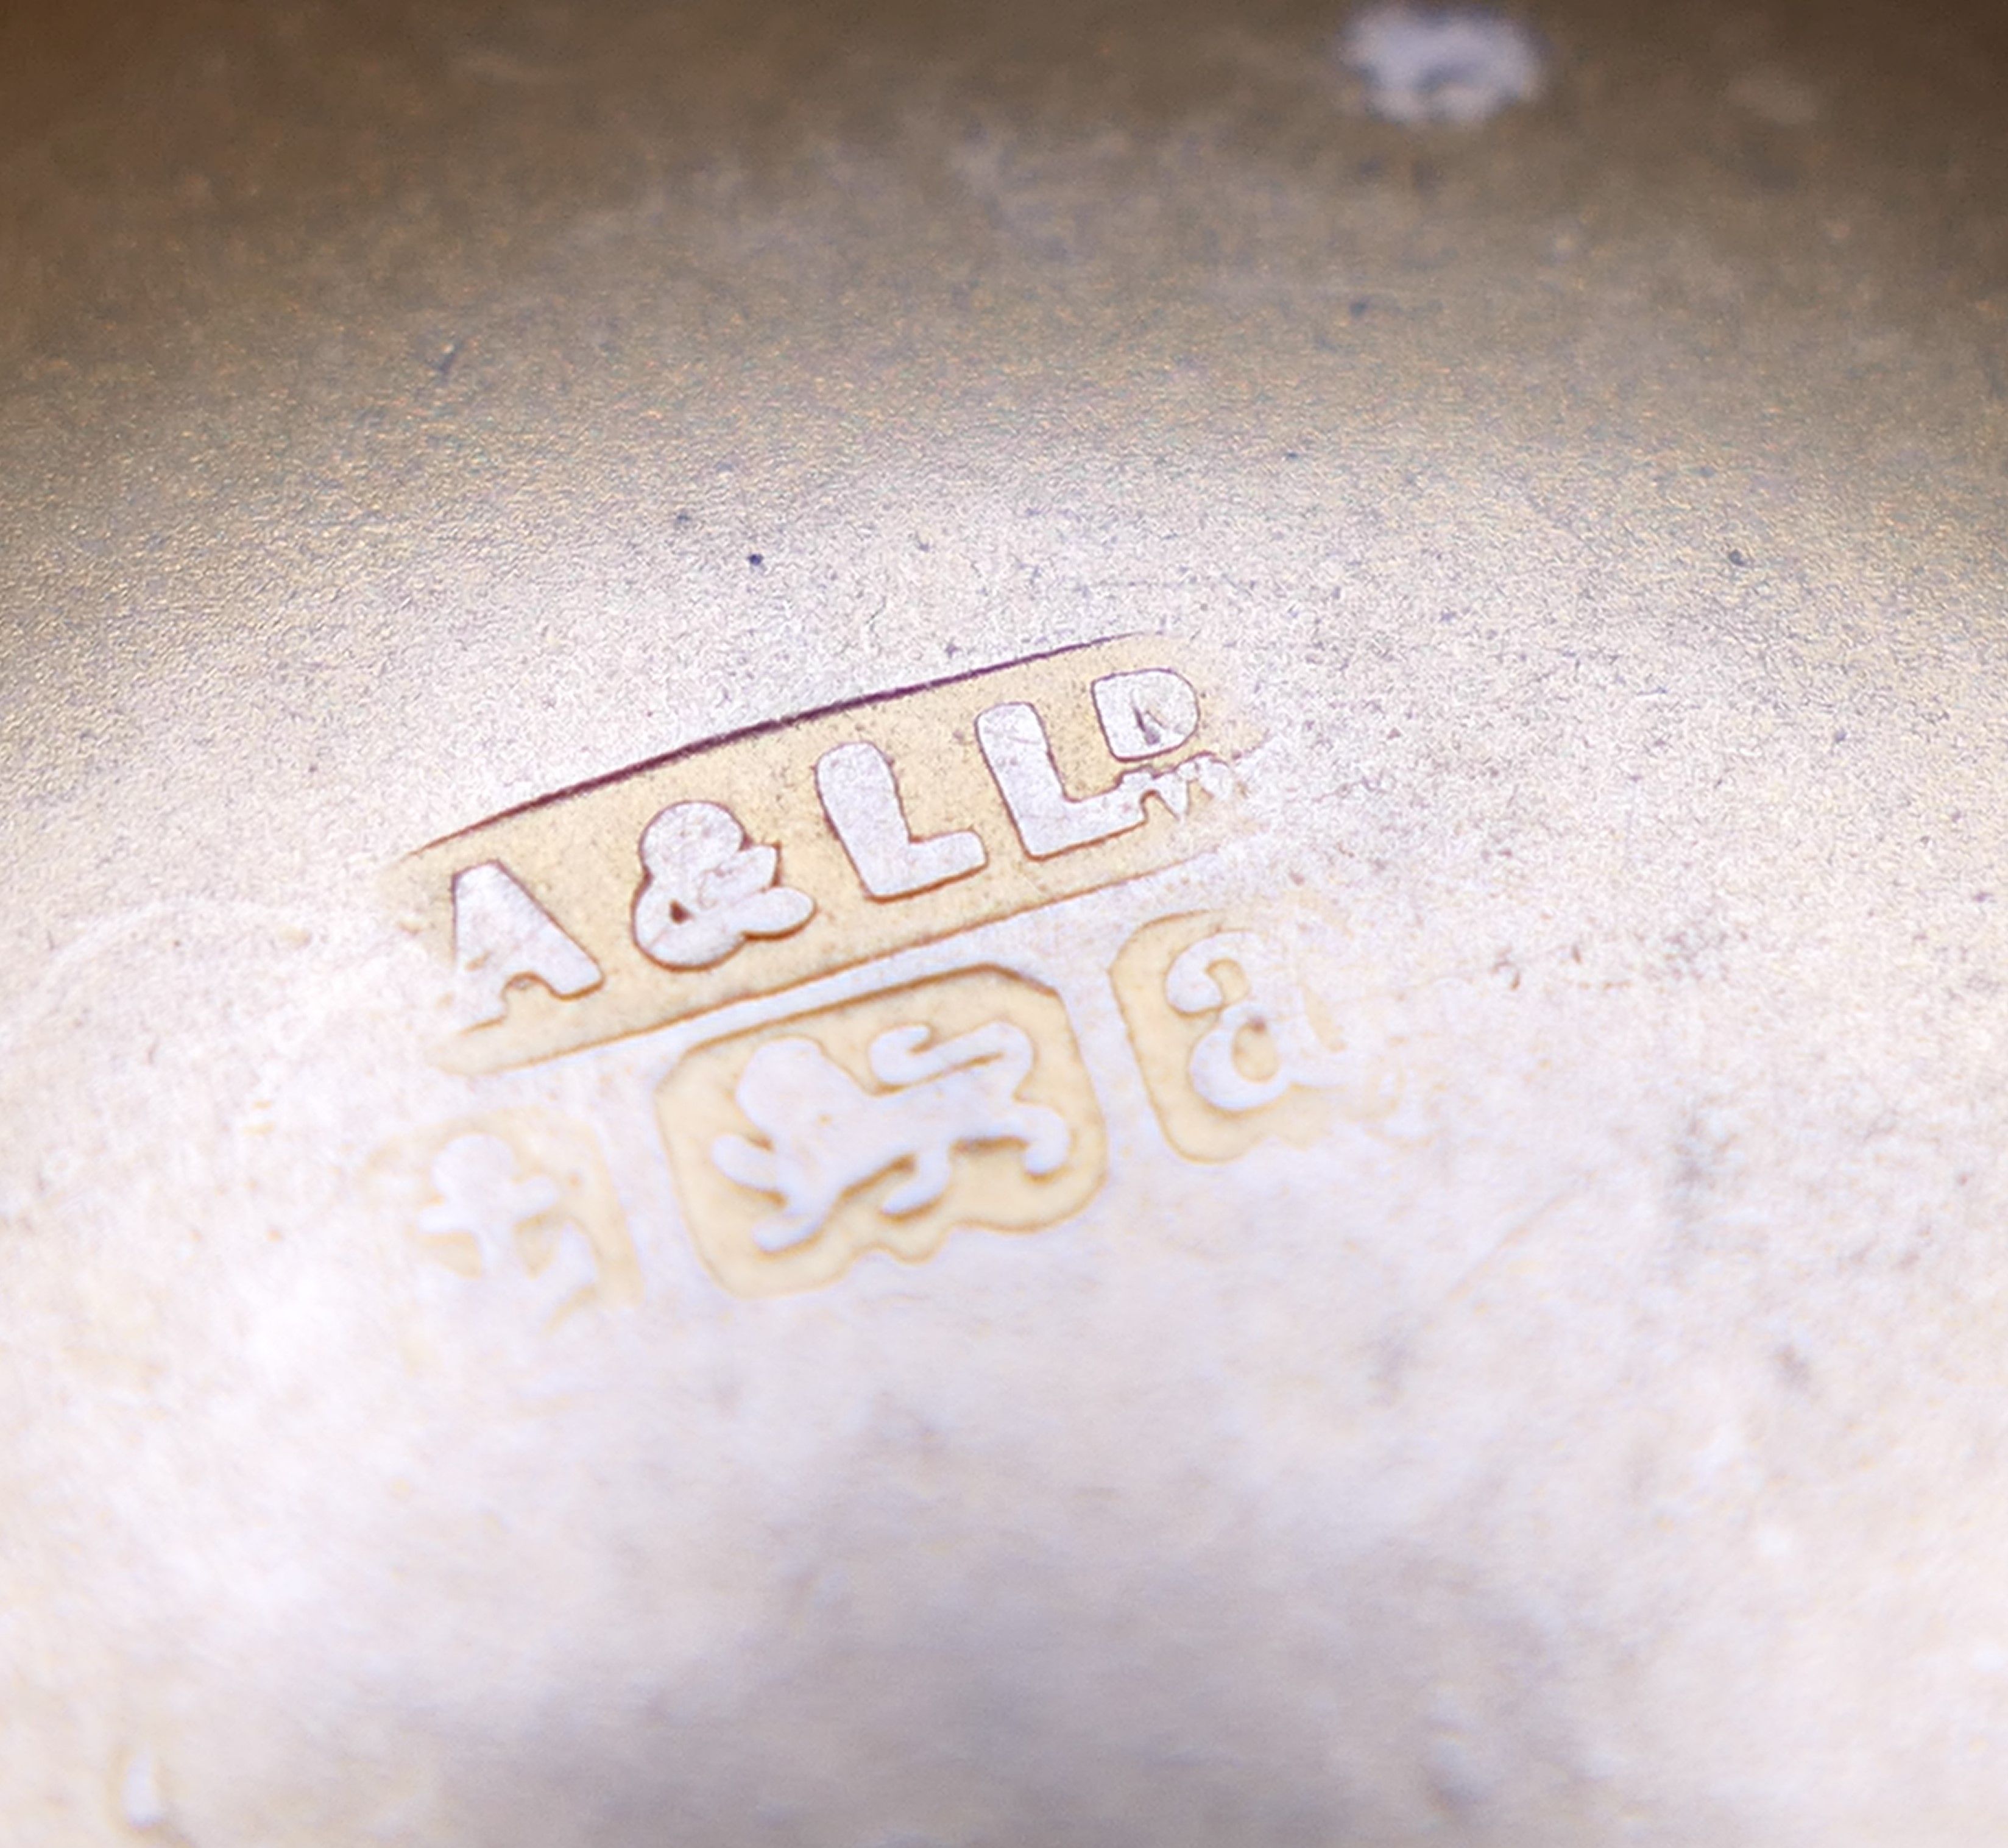 A small Edwardian silver round pill box, Birmingham 1900, top and bottom engraved with initials. - Image 6 of 7